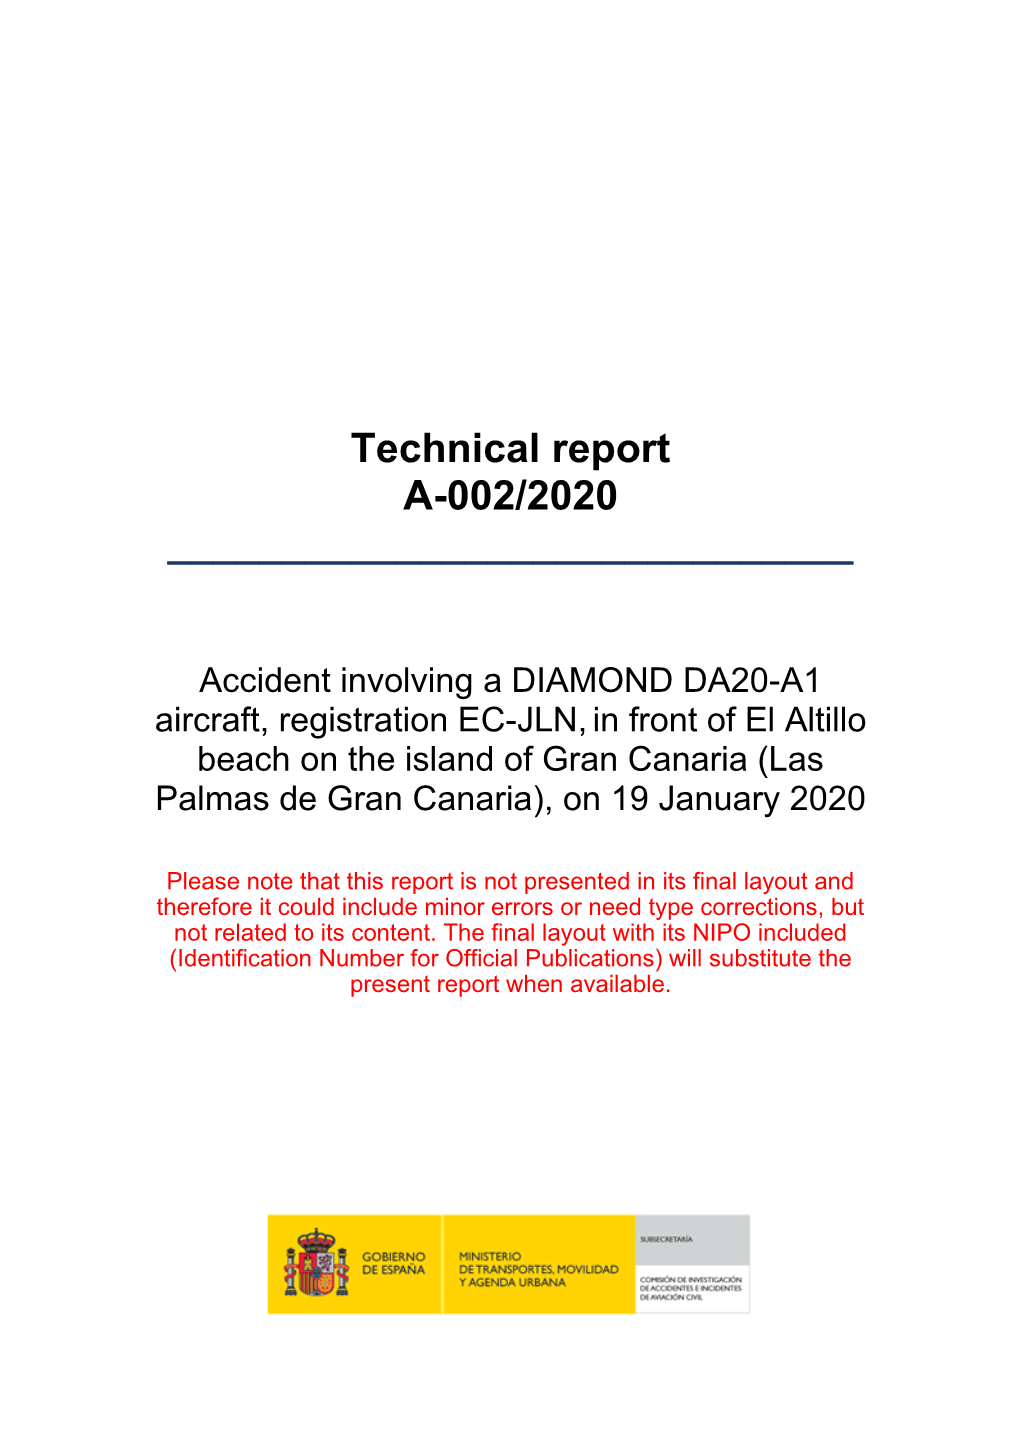 Technical Report A-002/2020 ______